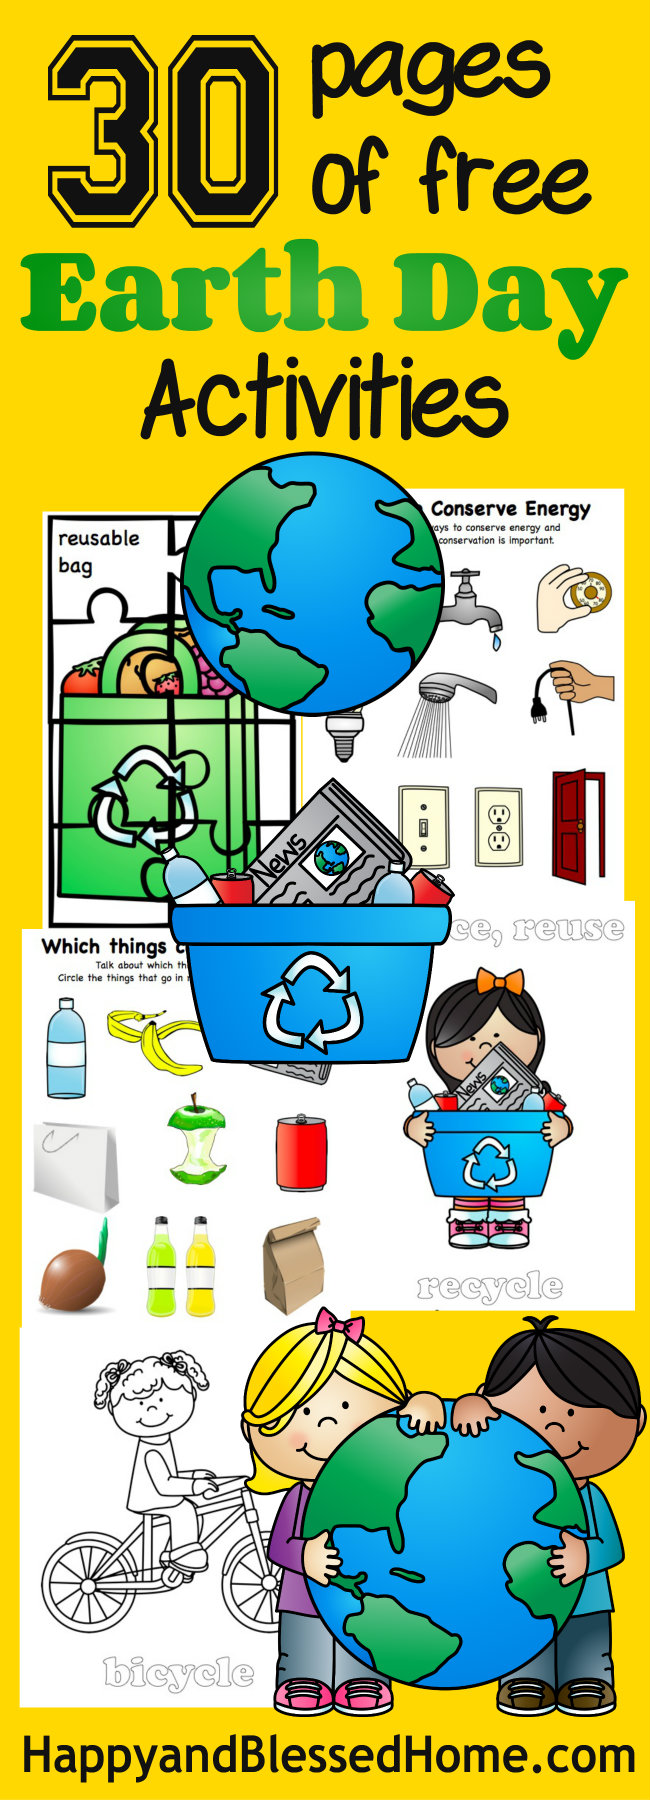 Earth Day Activity Pack from HappyandBlessedHome.com